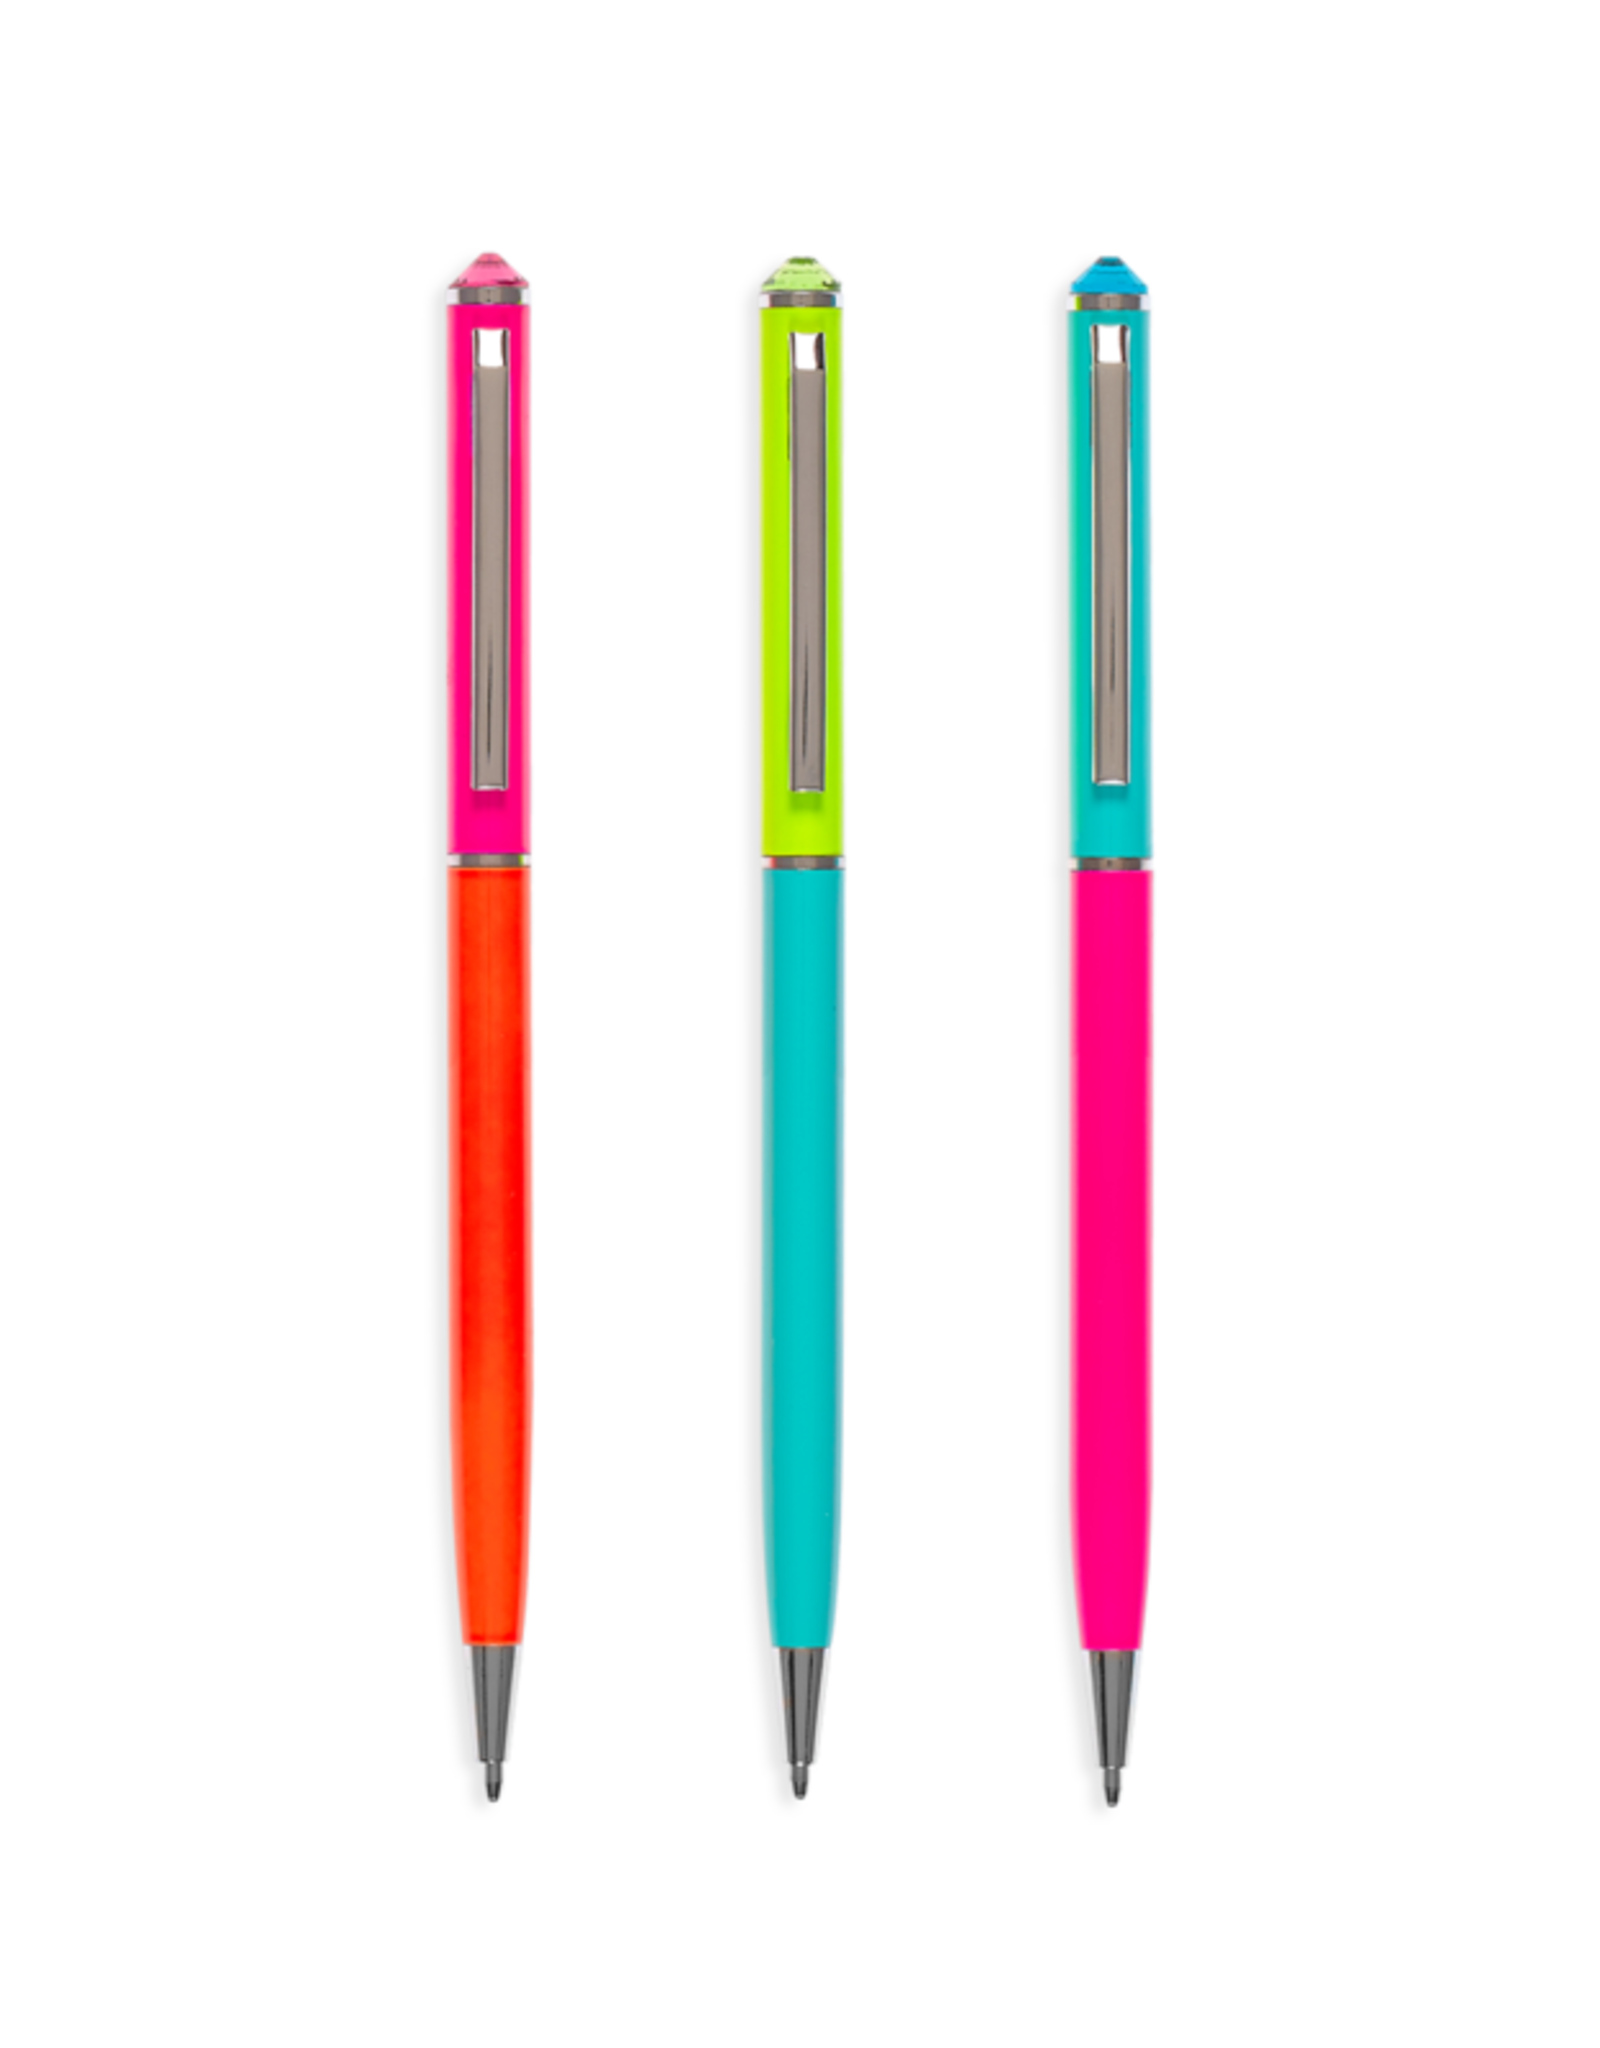 OOLY STYLE WRITERS BALLPOINT PENS - NEON